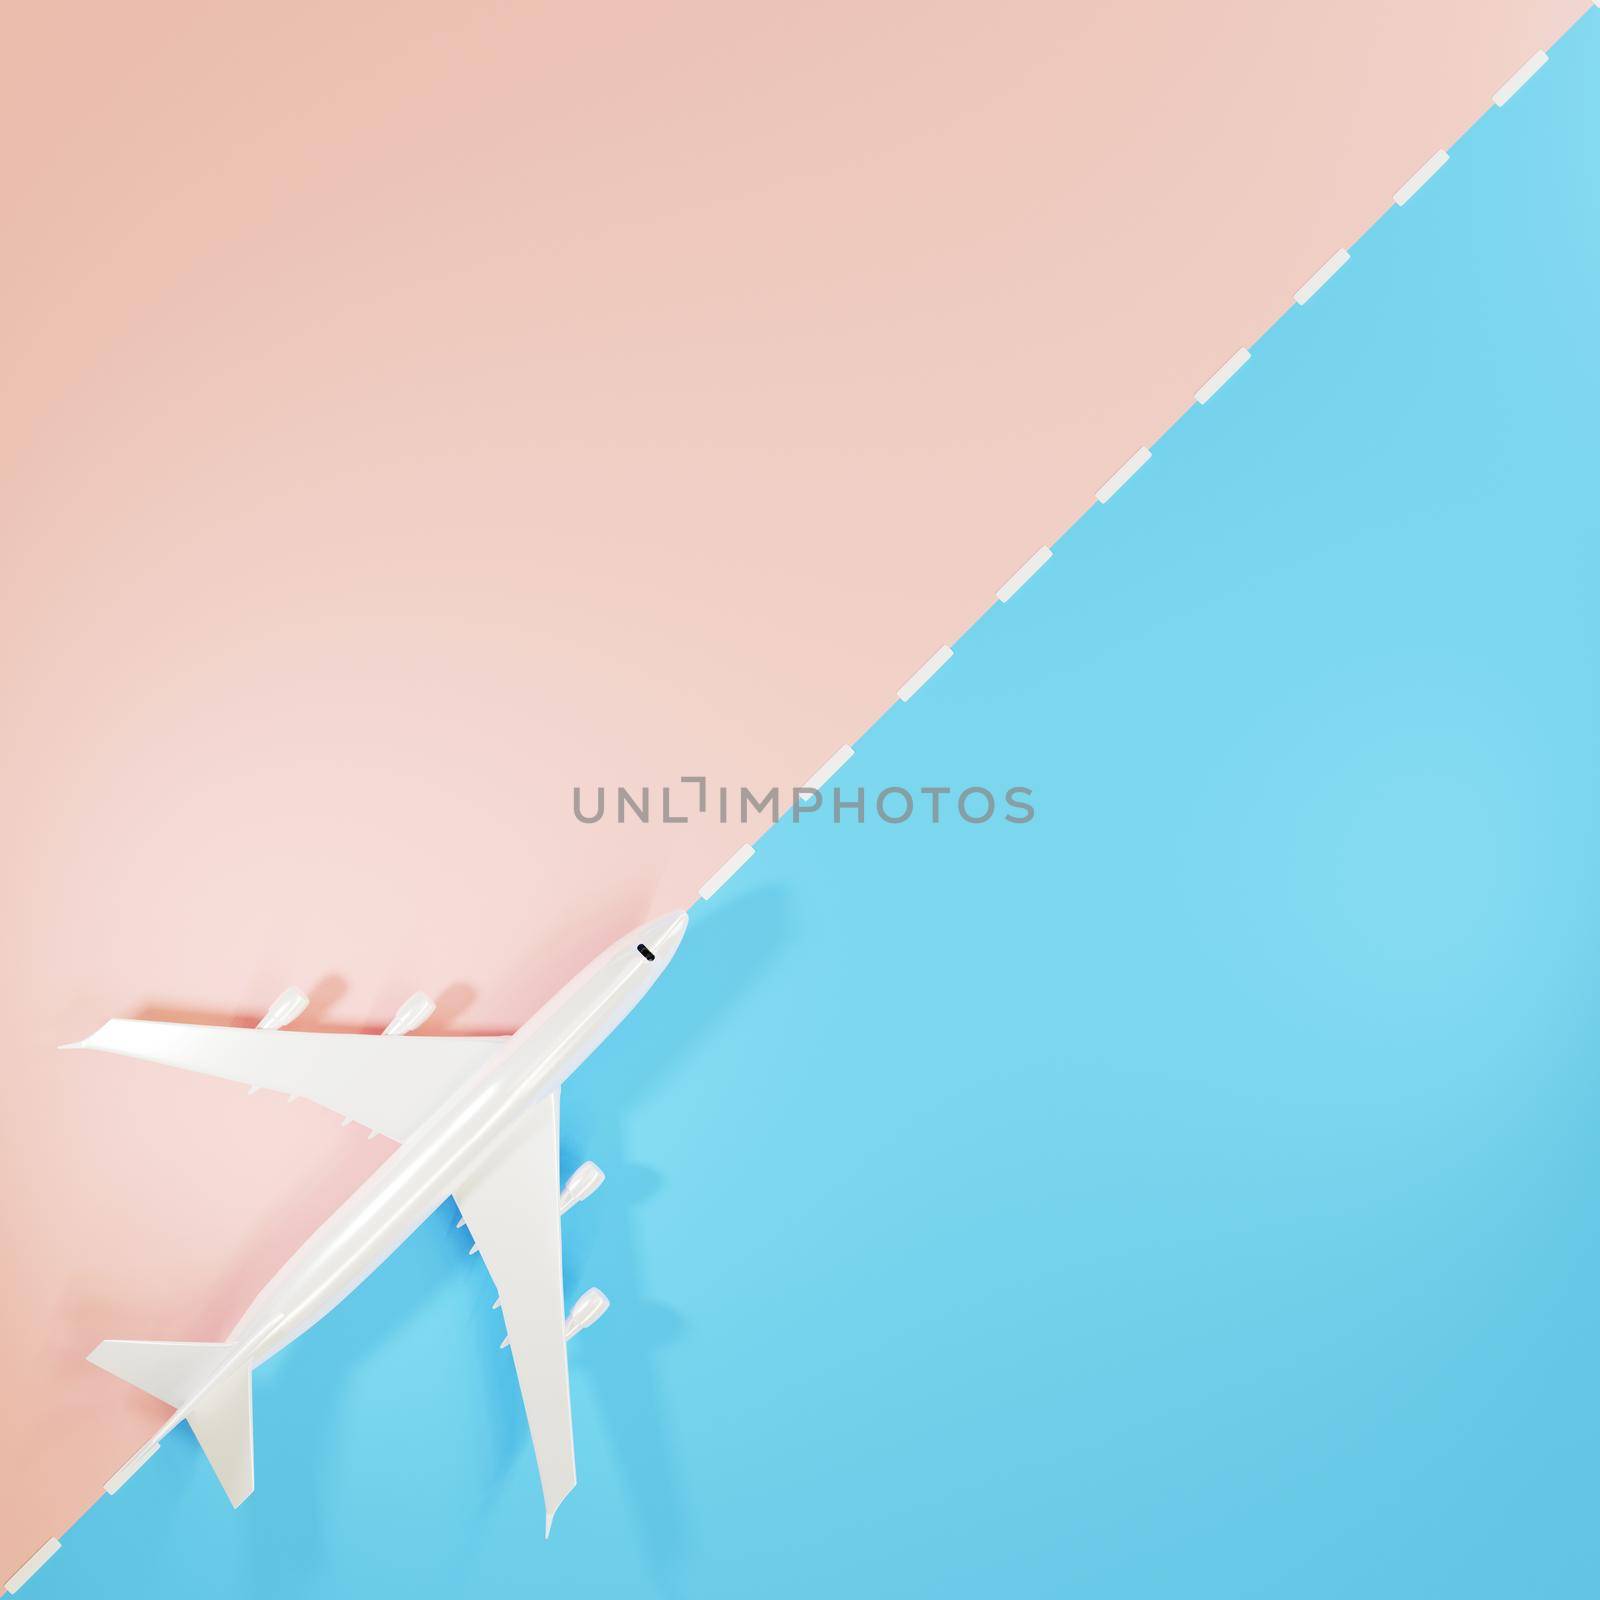 Top view Airplane during landing or taking off over ground on runway from the airport, Large jet plane takeoff on pink and blue background, business travel flight concept, 3D rendering illustration